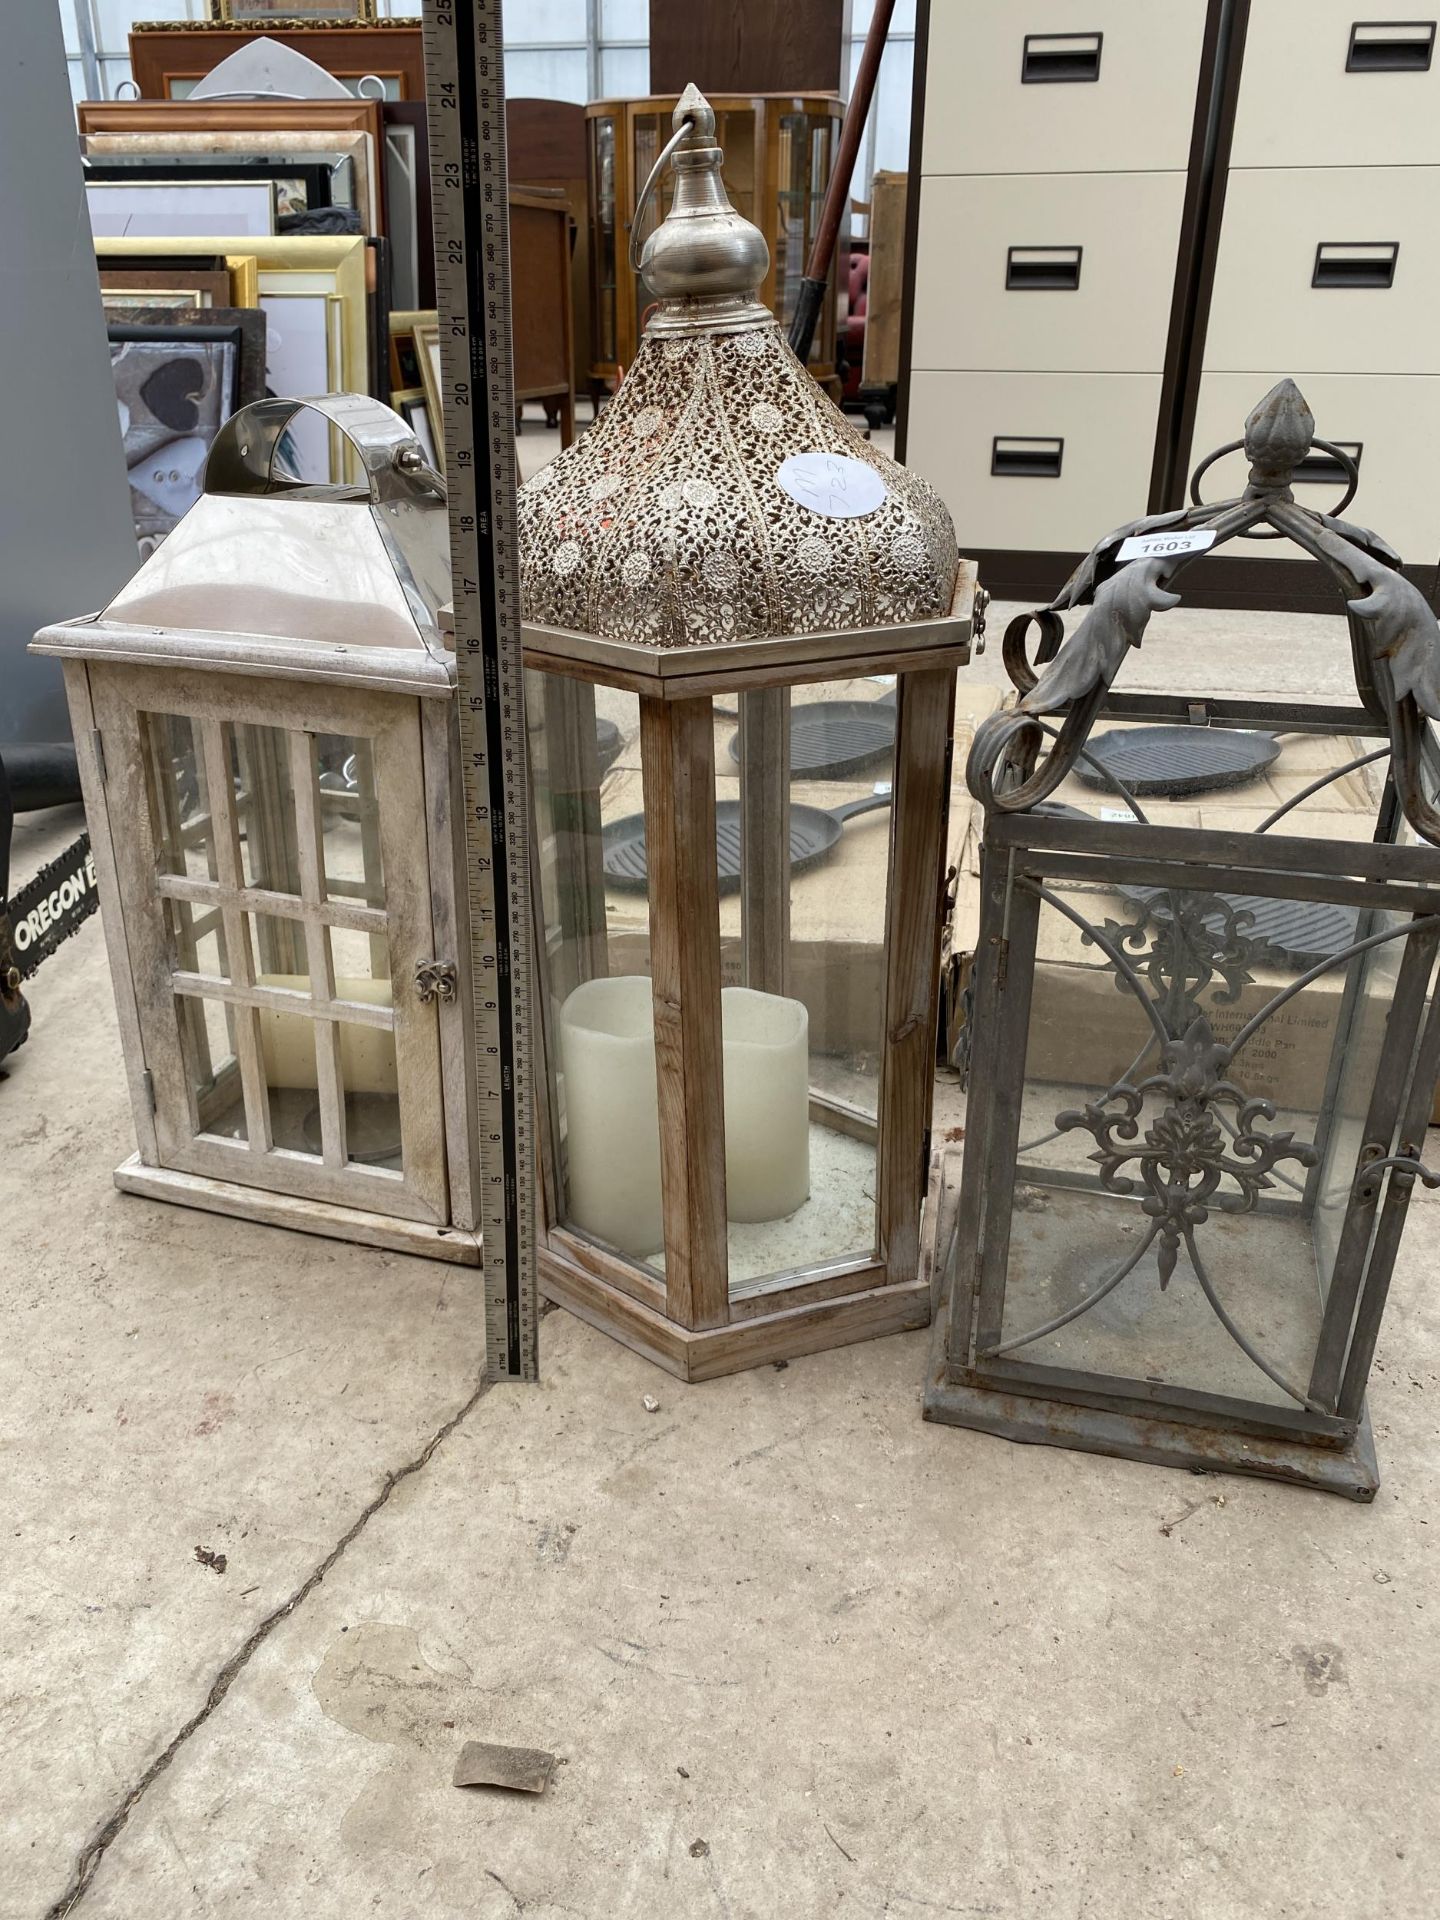 THREE VARIOUS GLASS AND METAL CANDLE LANTERNS - Image 2 of 2